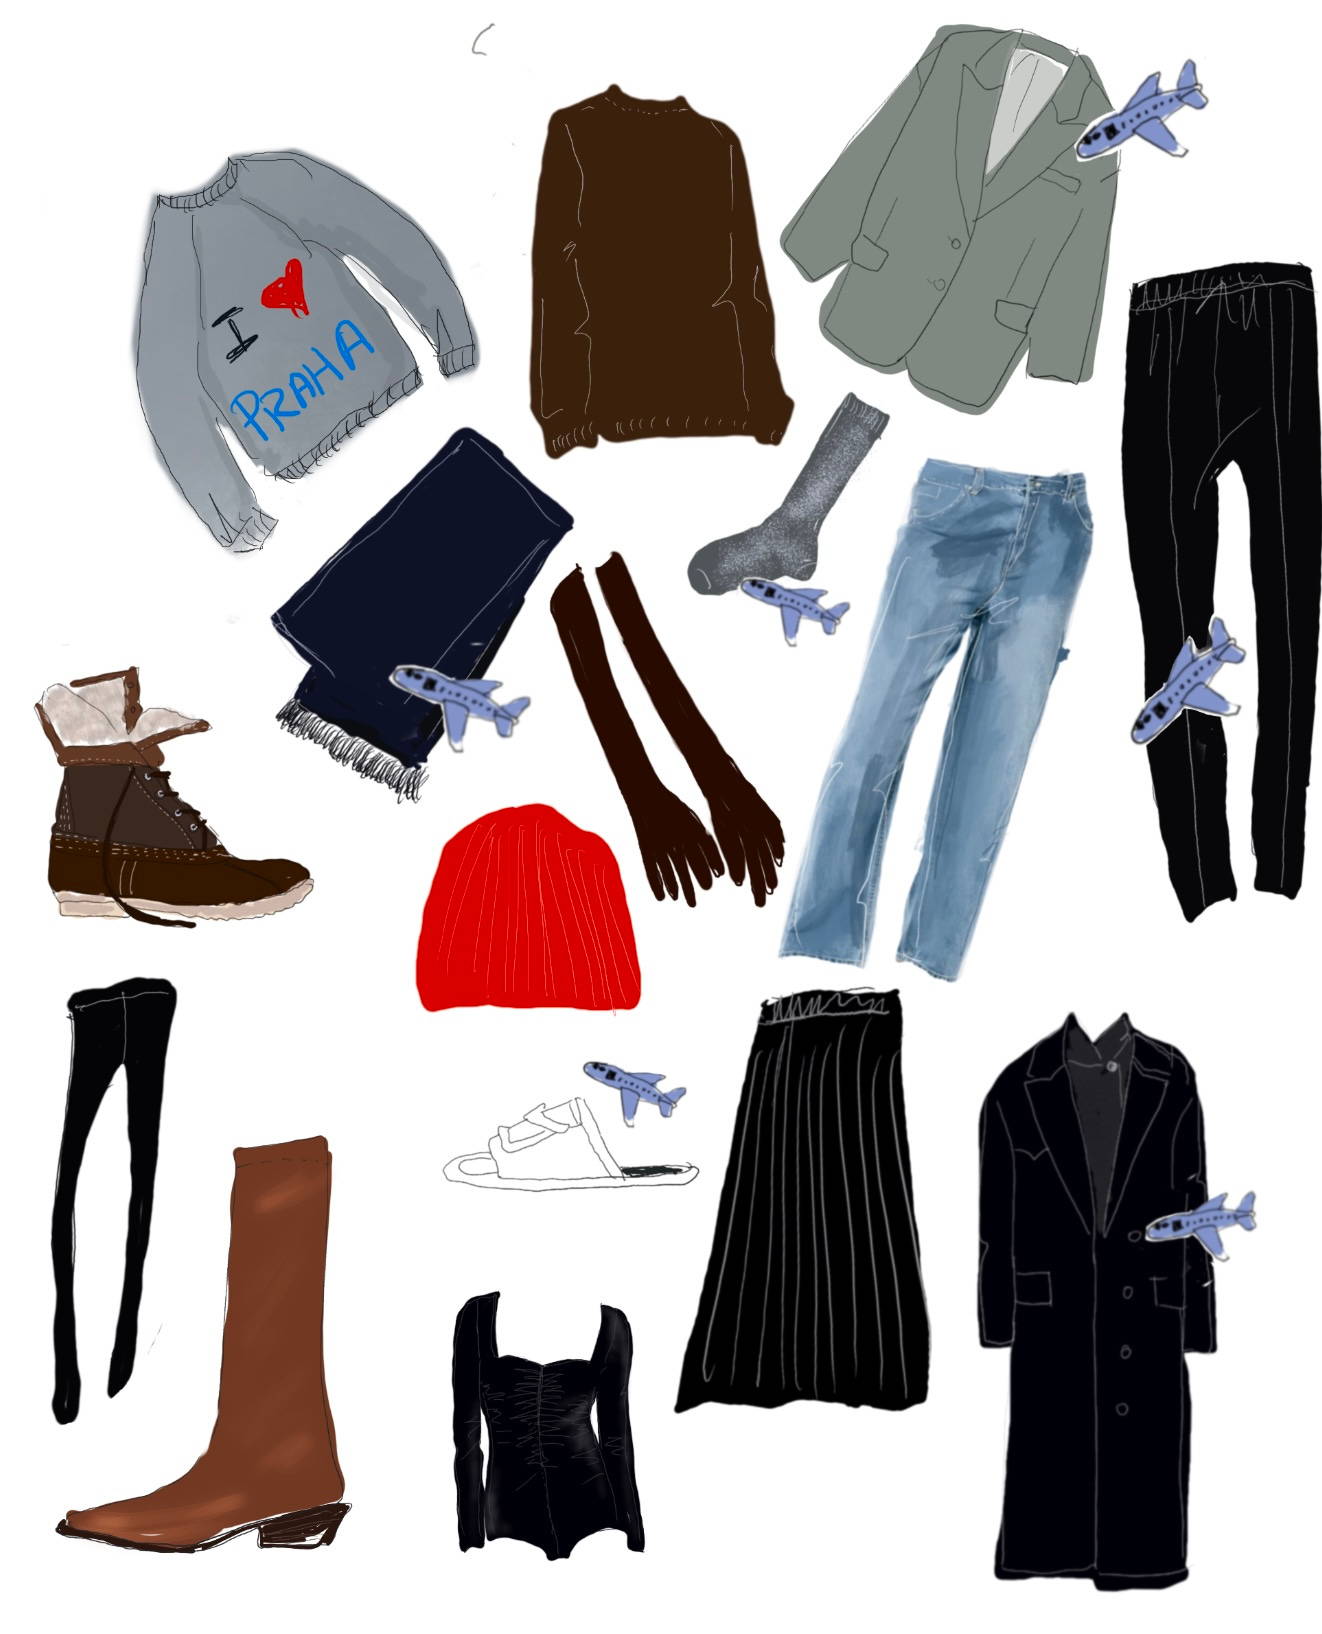 illustration of clothing for travel